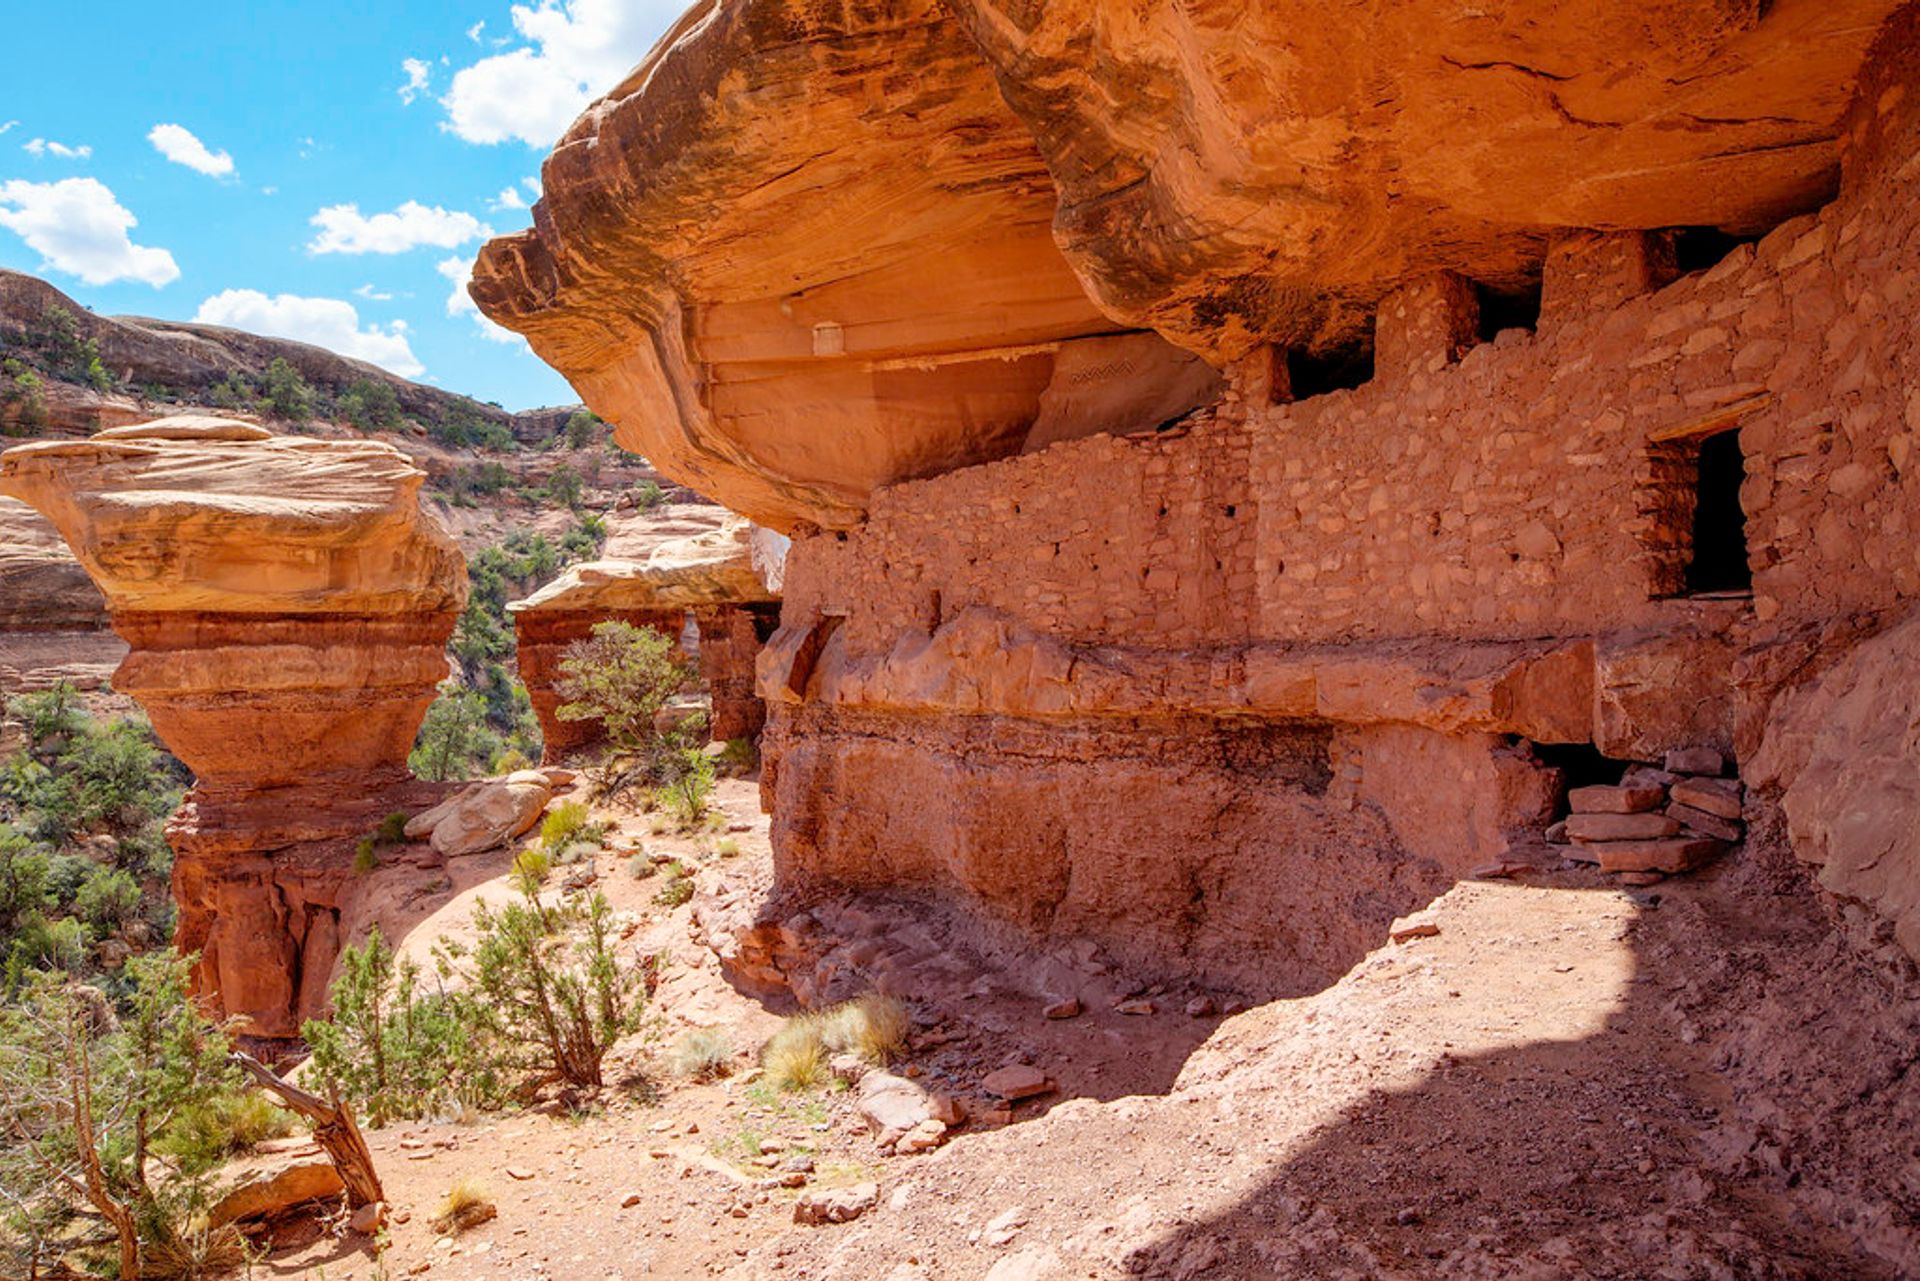 The “Moon House” archaeological site at Bears Ears National Monument. Photo: Bob Wick/Bureau of Land Management.